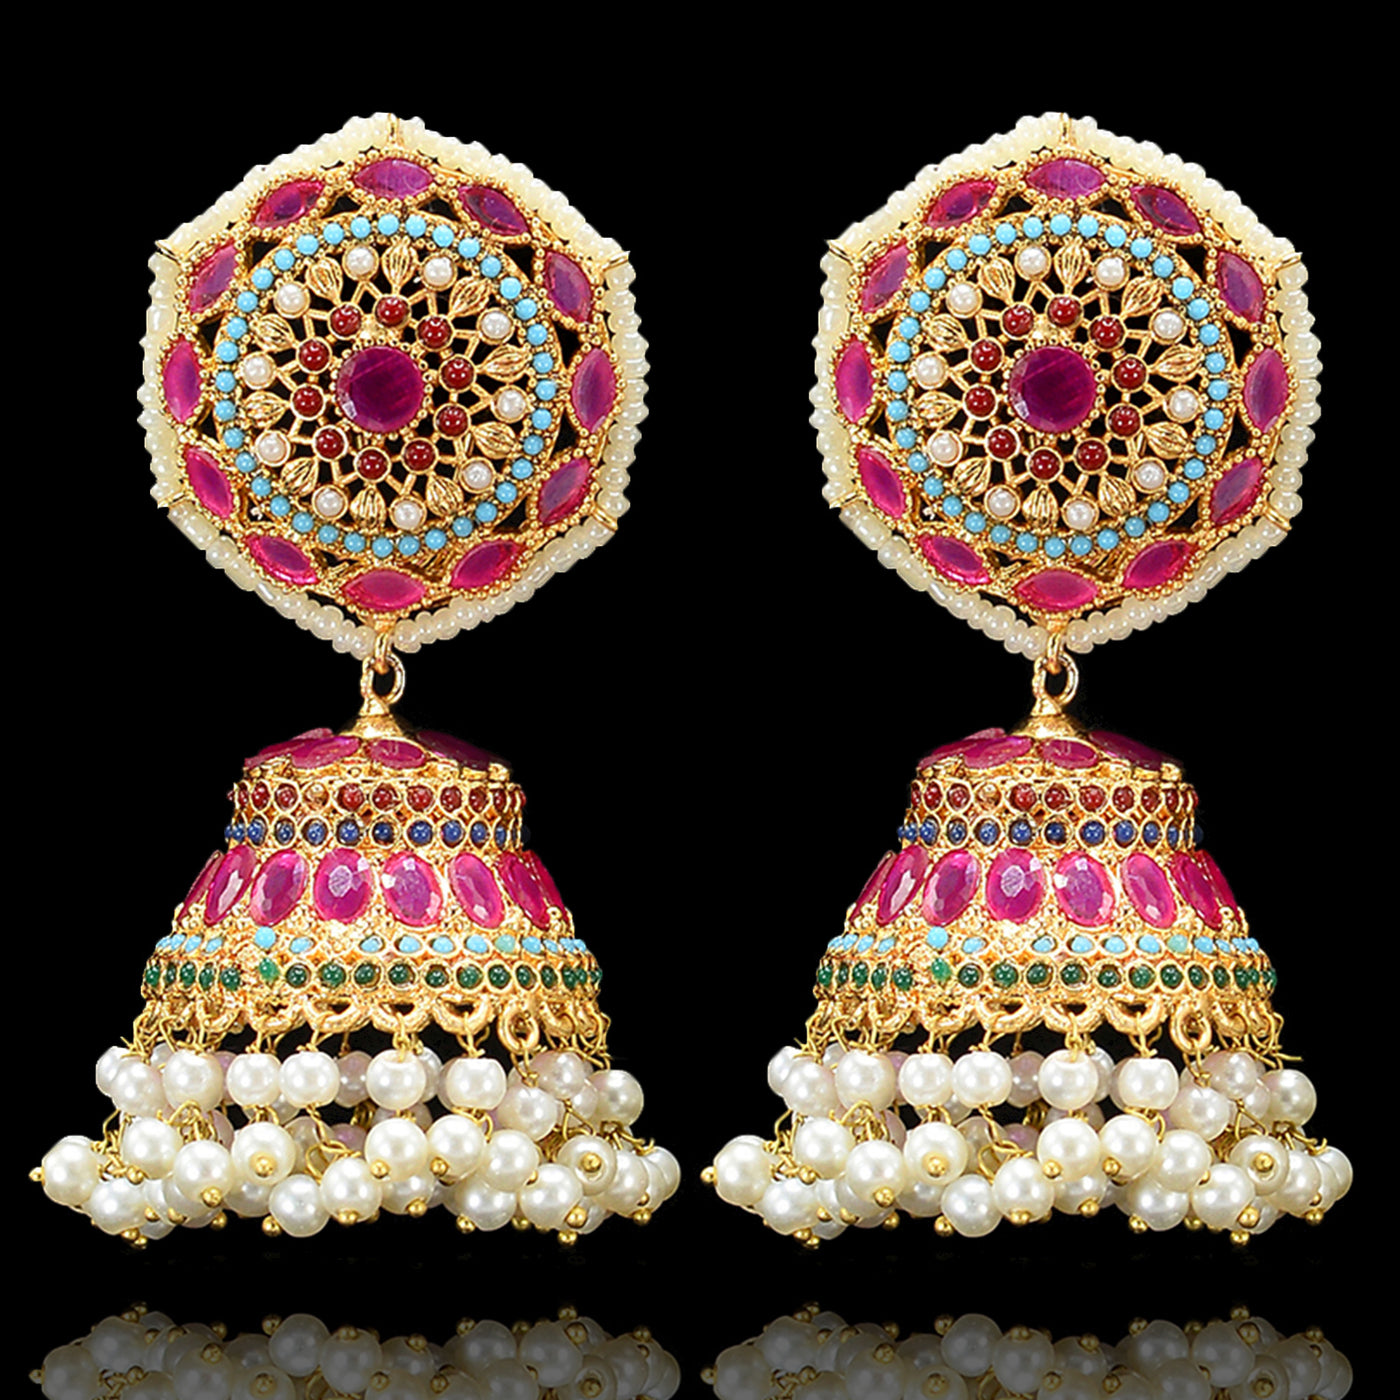 Abrish Earrings - Available in 3 Colors